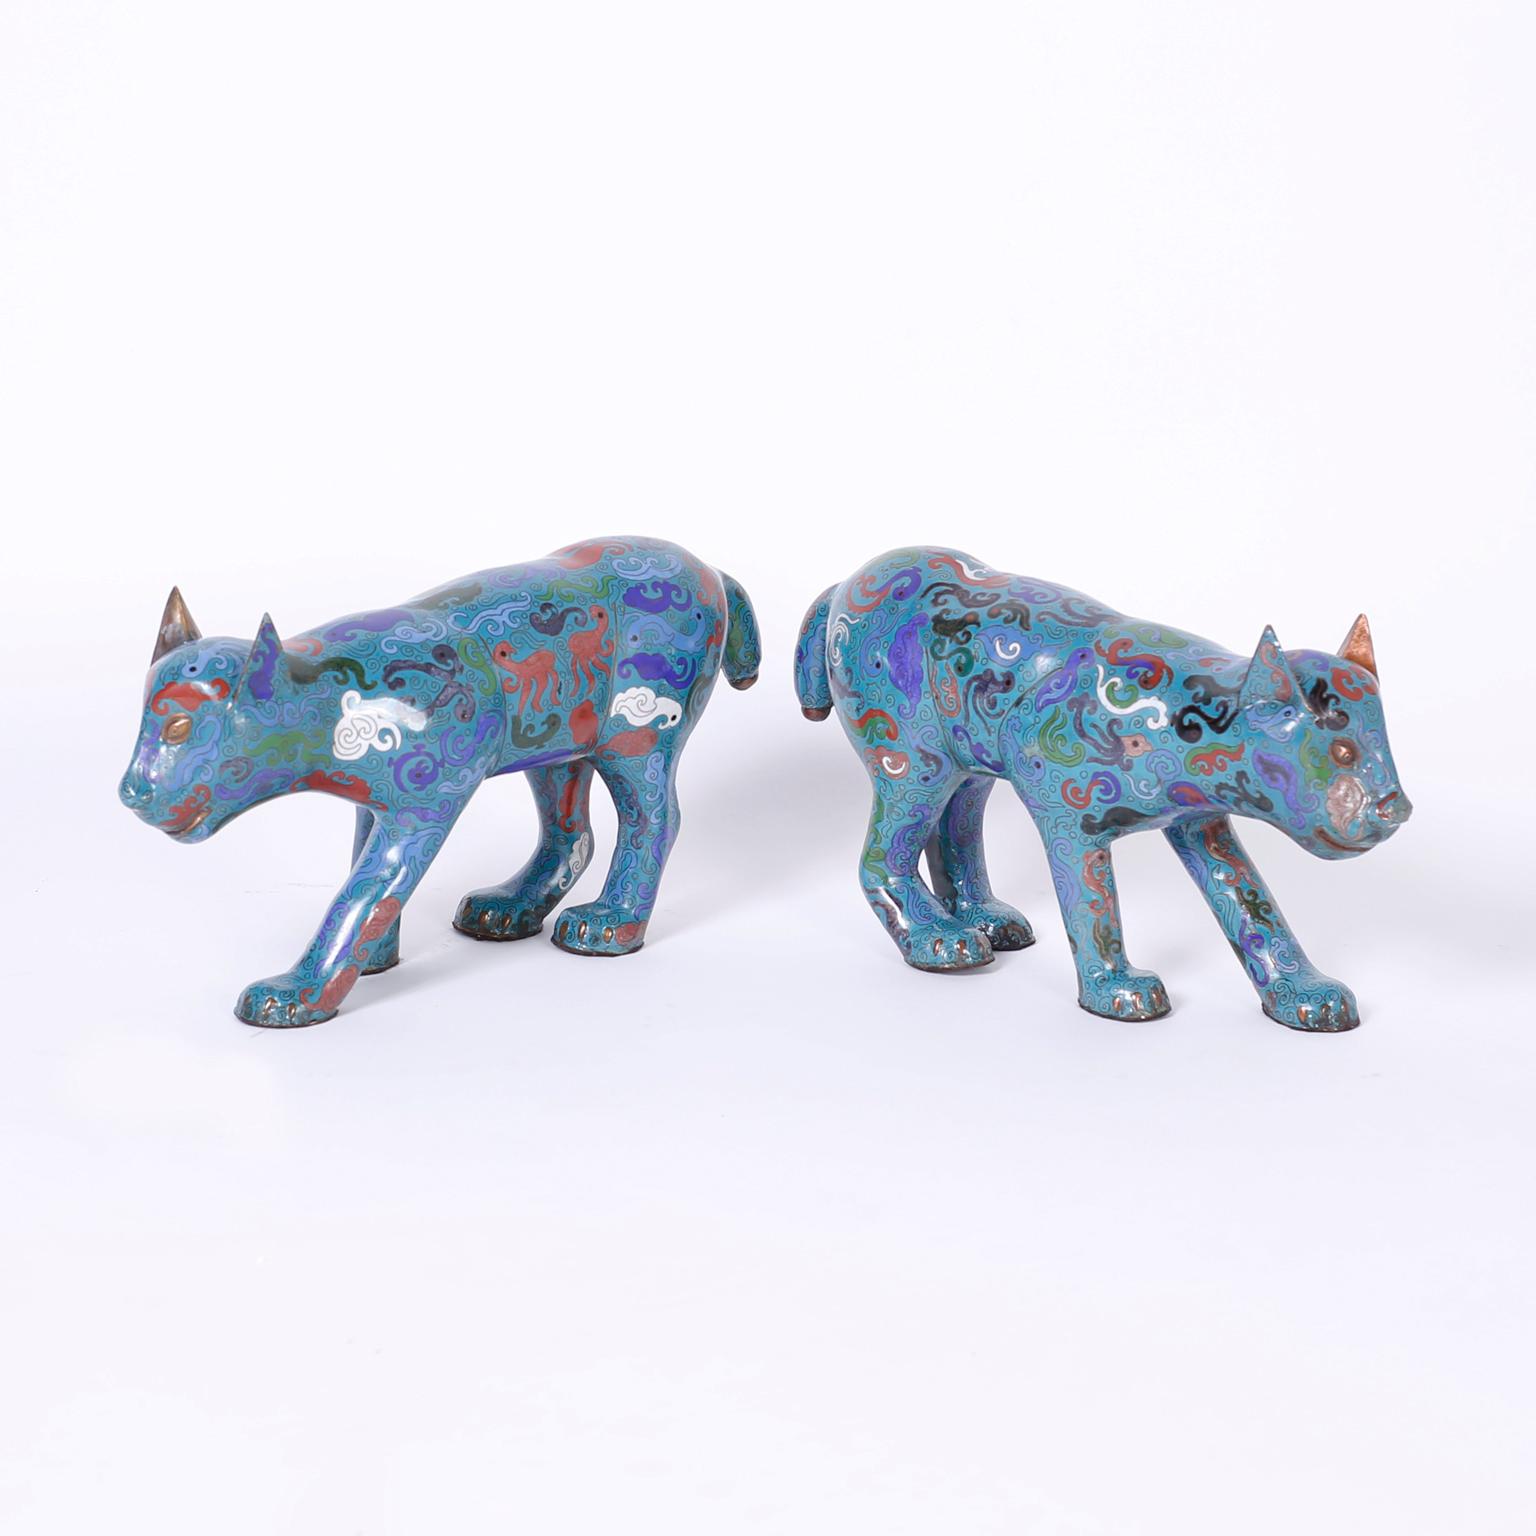 Pair of Chinese cloisonné or enamel on copper cats in a familiar stalking pose decorated with symbolic biomorphic designs over an alluring blue background.